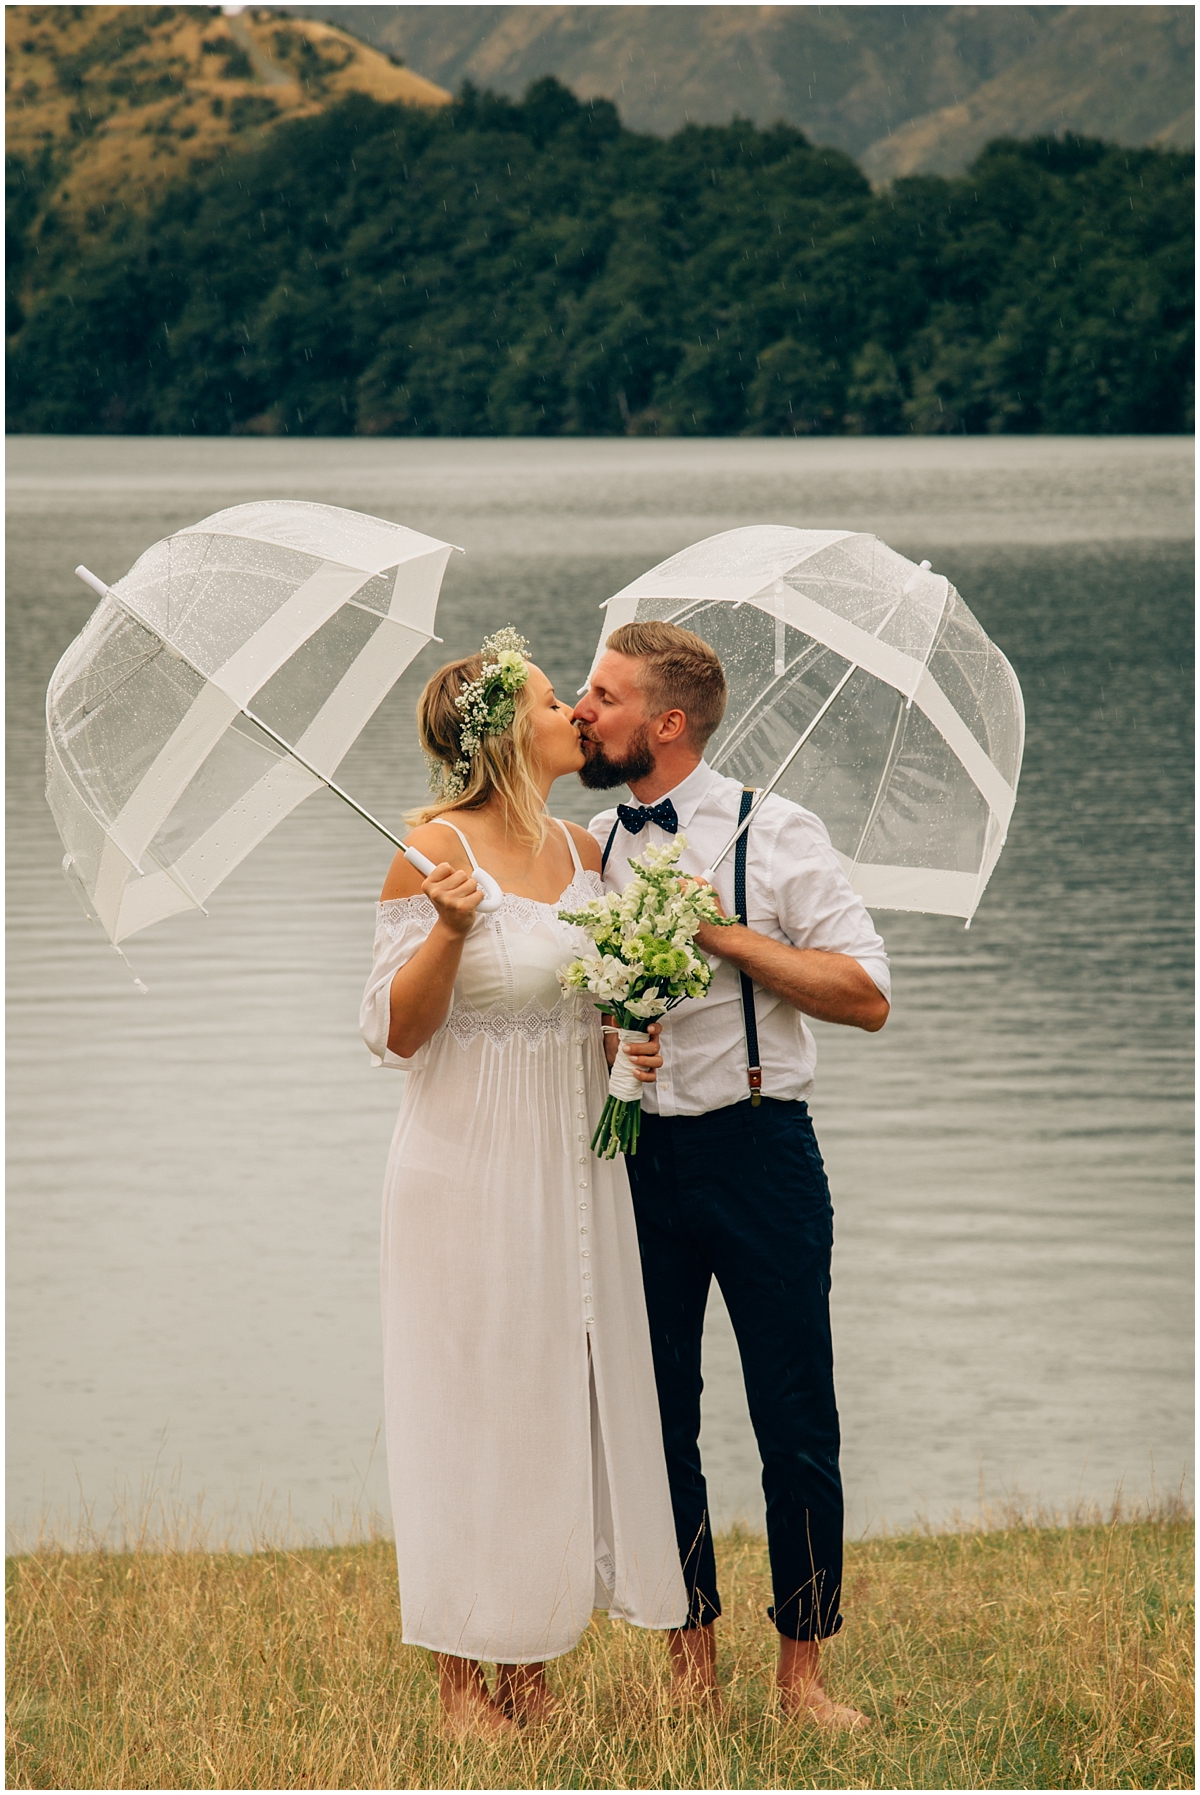 Bride and groom kiss at water's edge under umbrellas